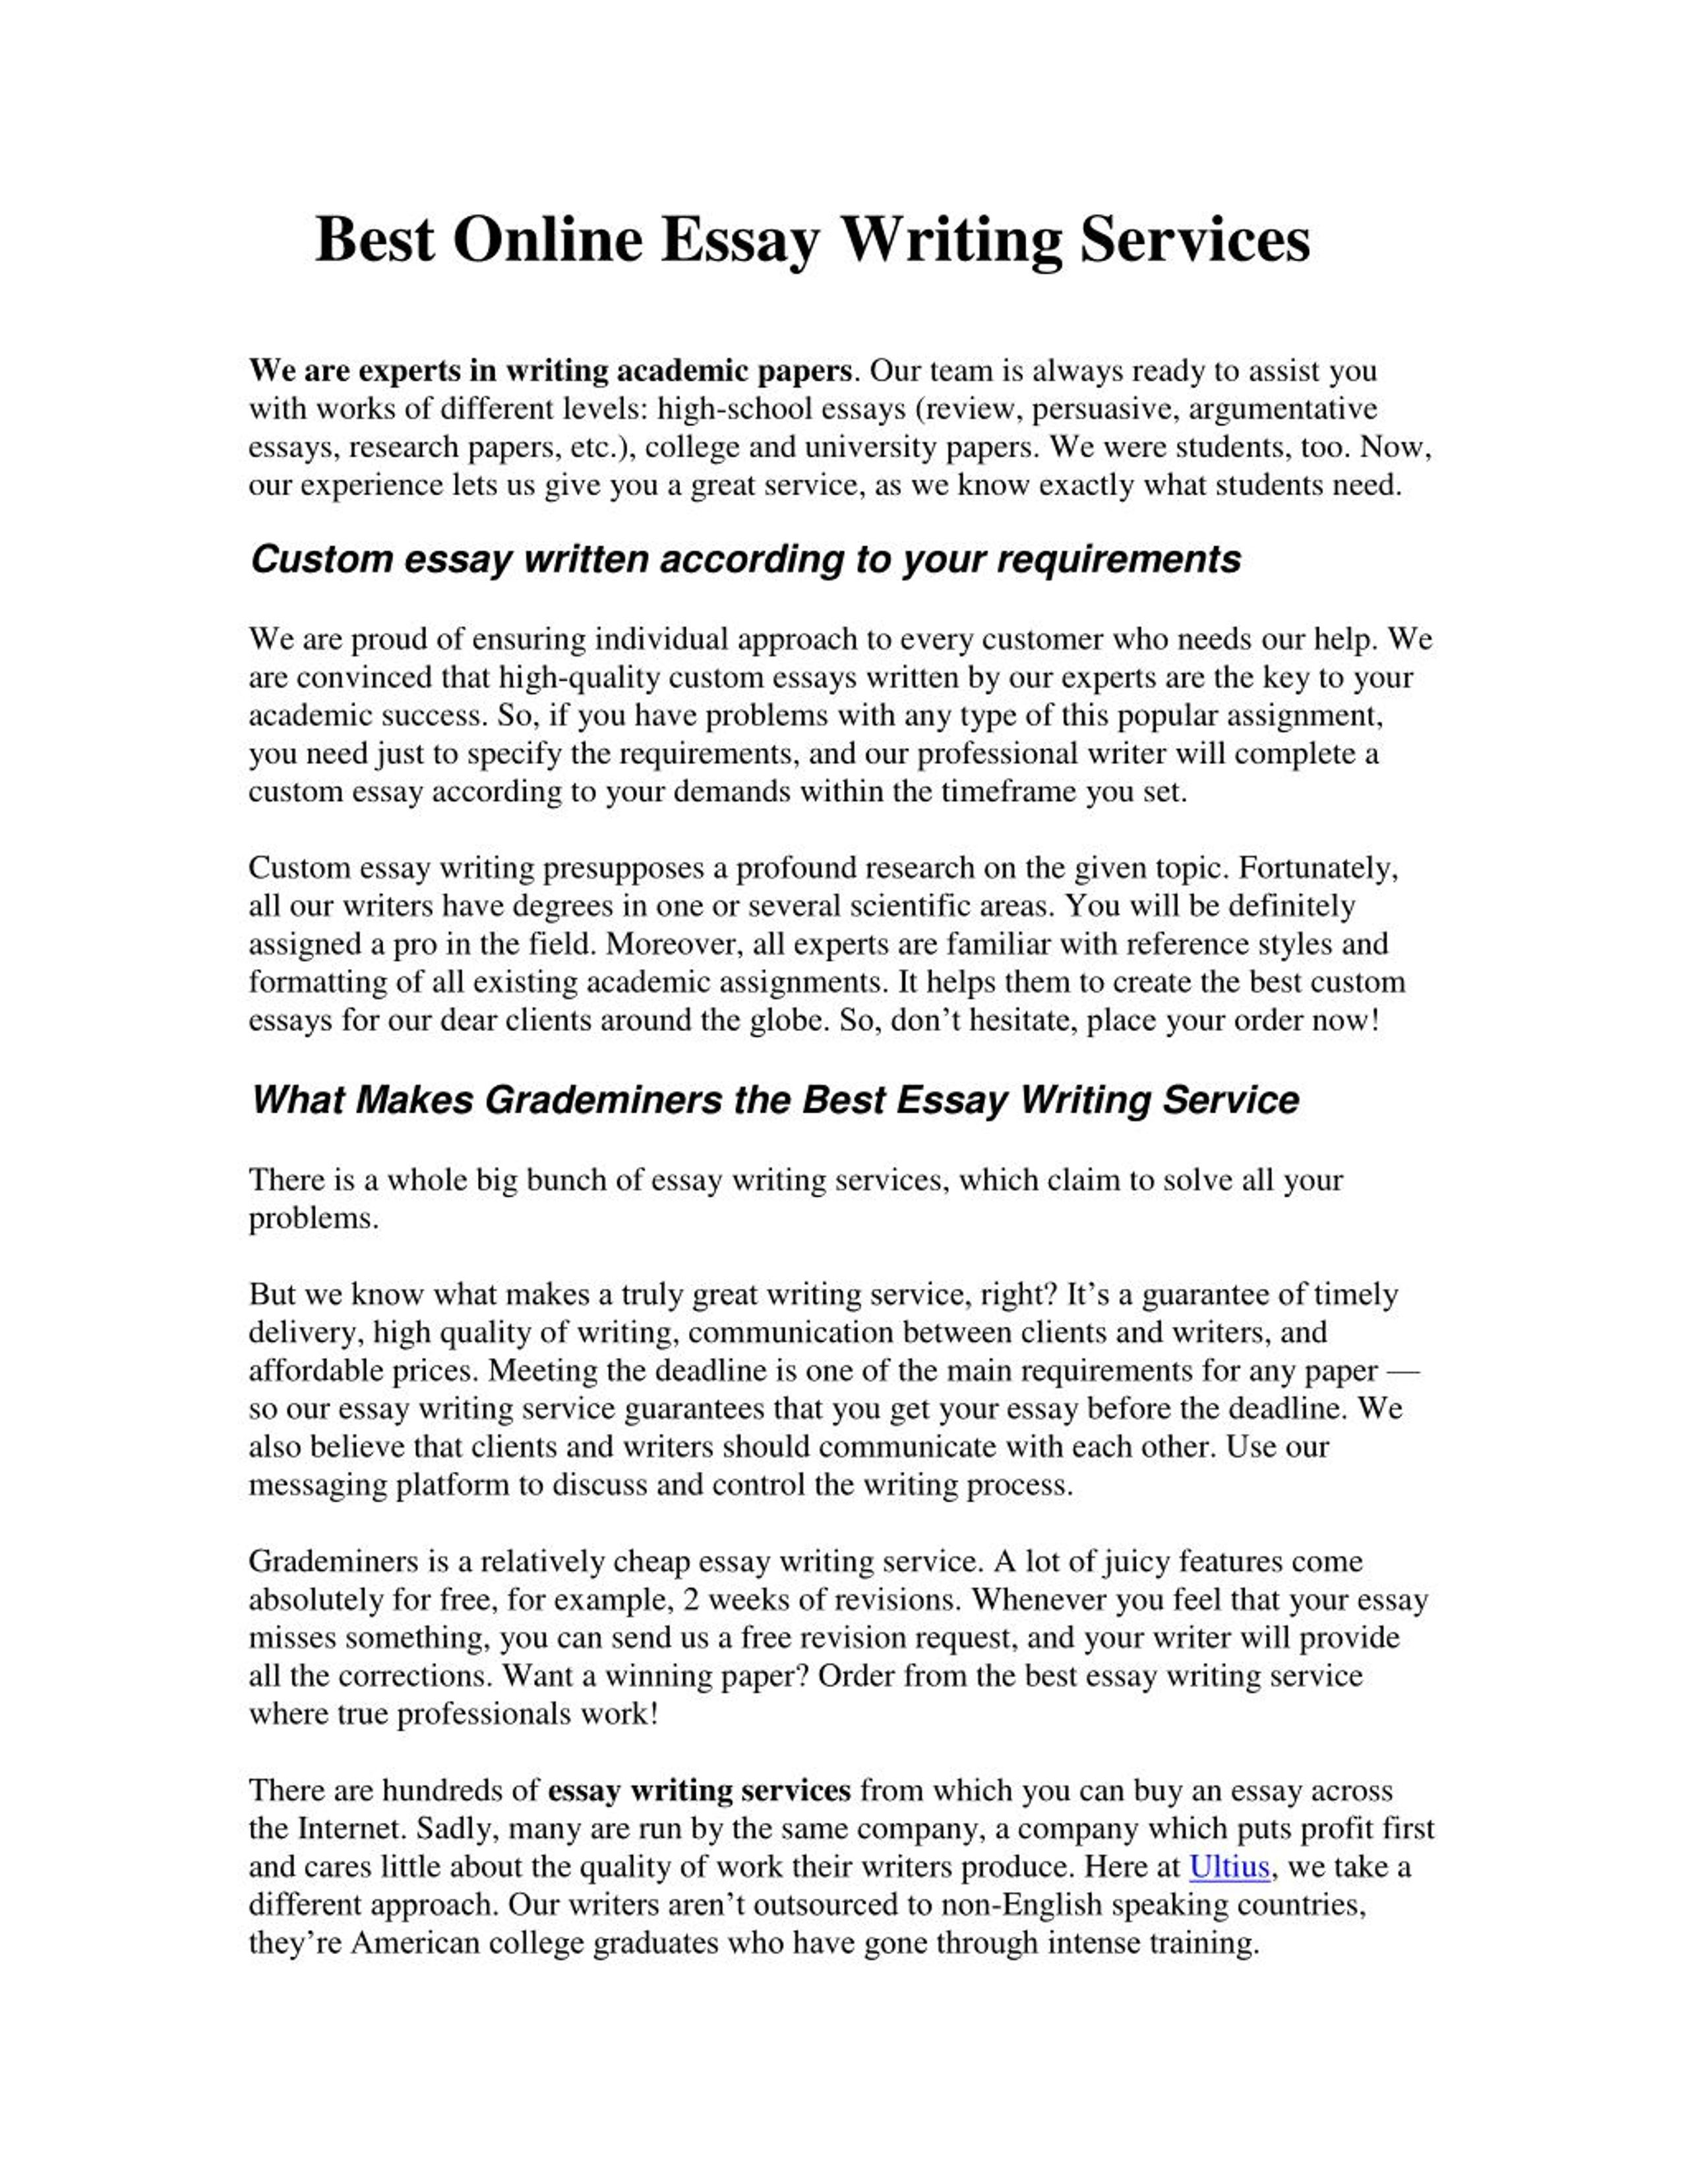 Need More Time? Read These Tips To Eliminate essay writing service